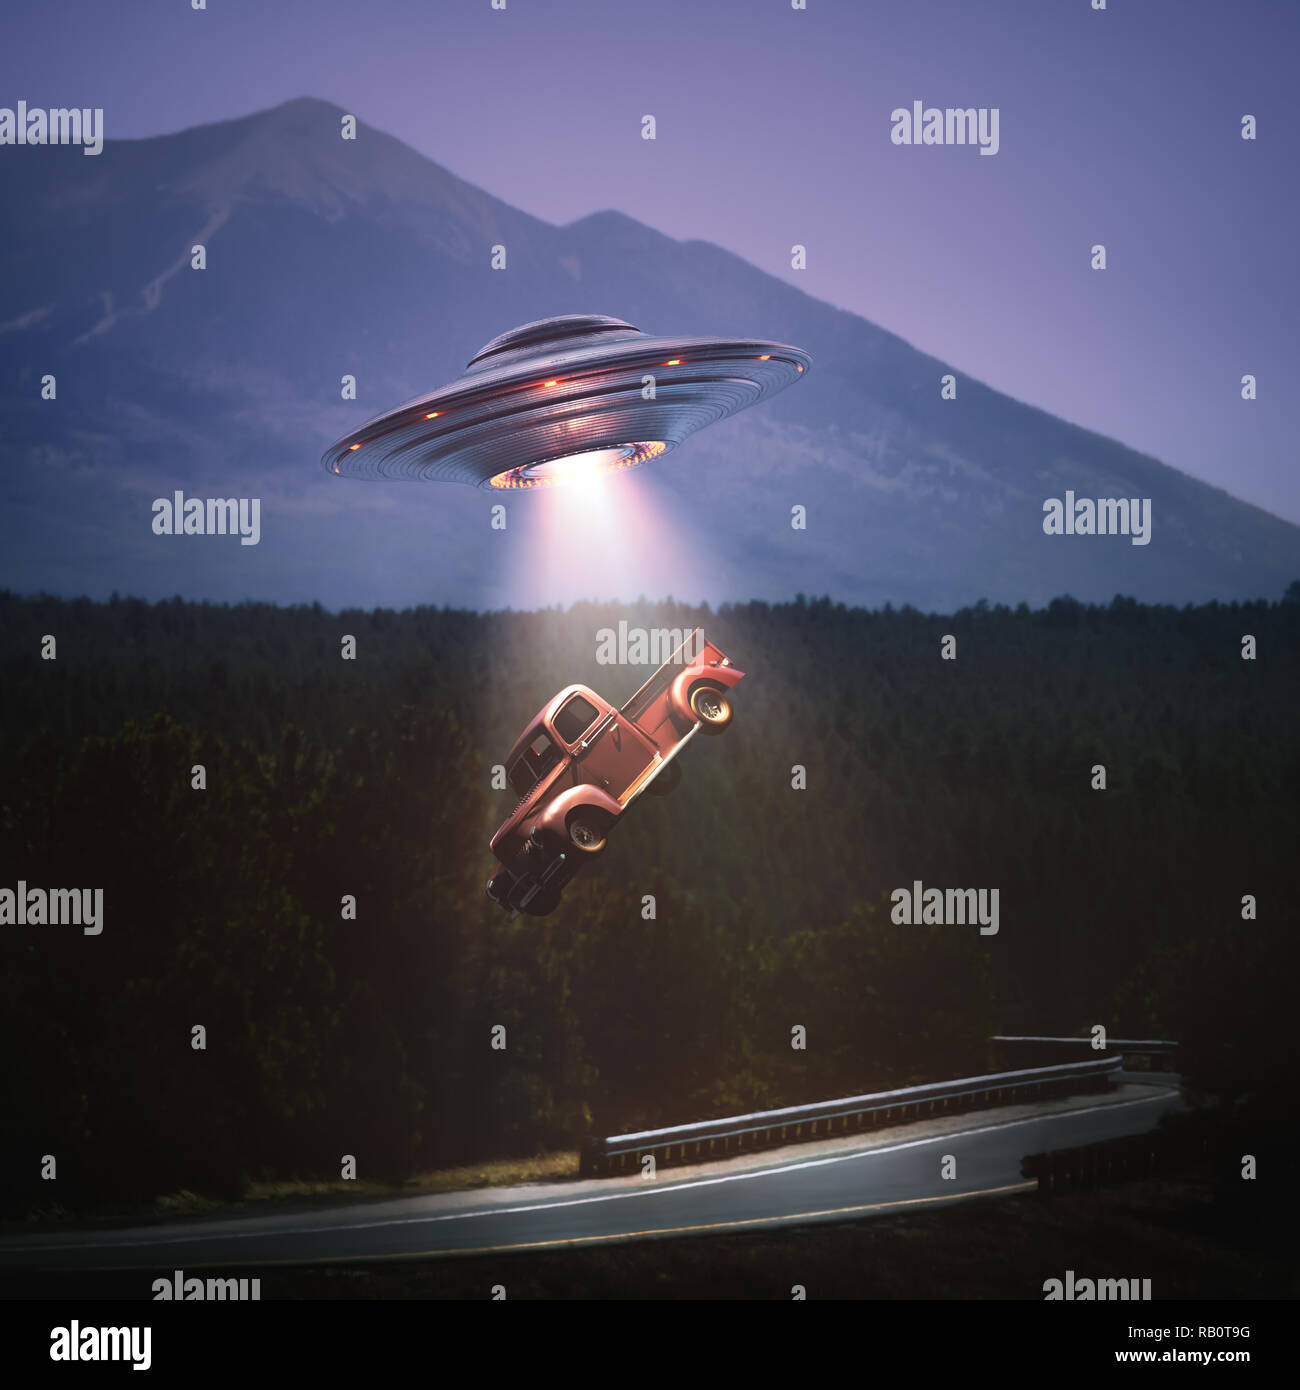 Unidentified flying object lifting a car from road. Concept of alien abduction. Clipping path included. Stock Photo